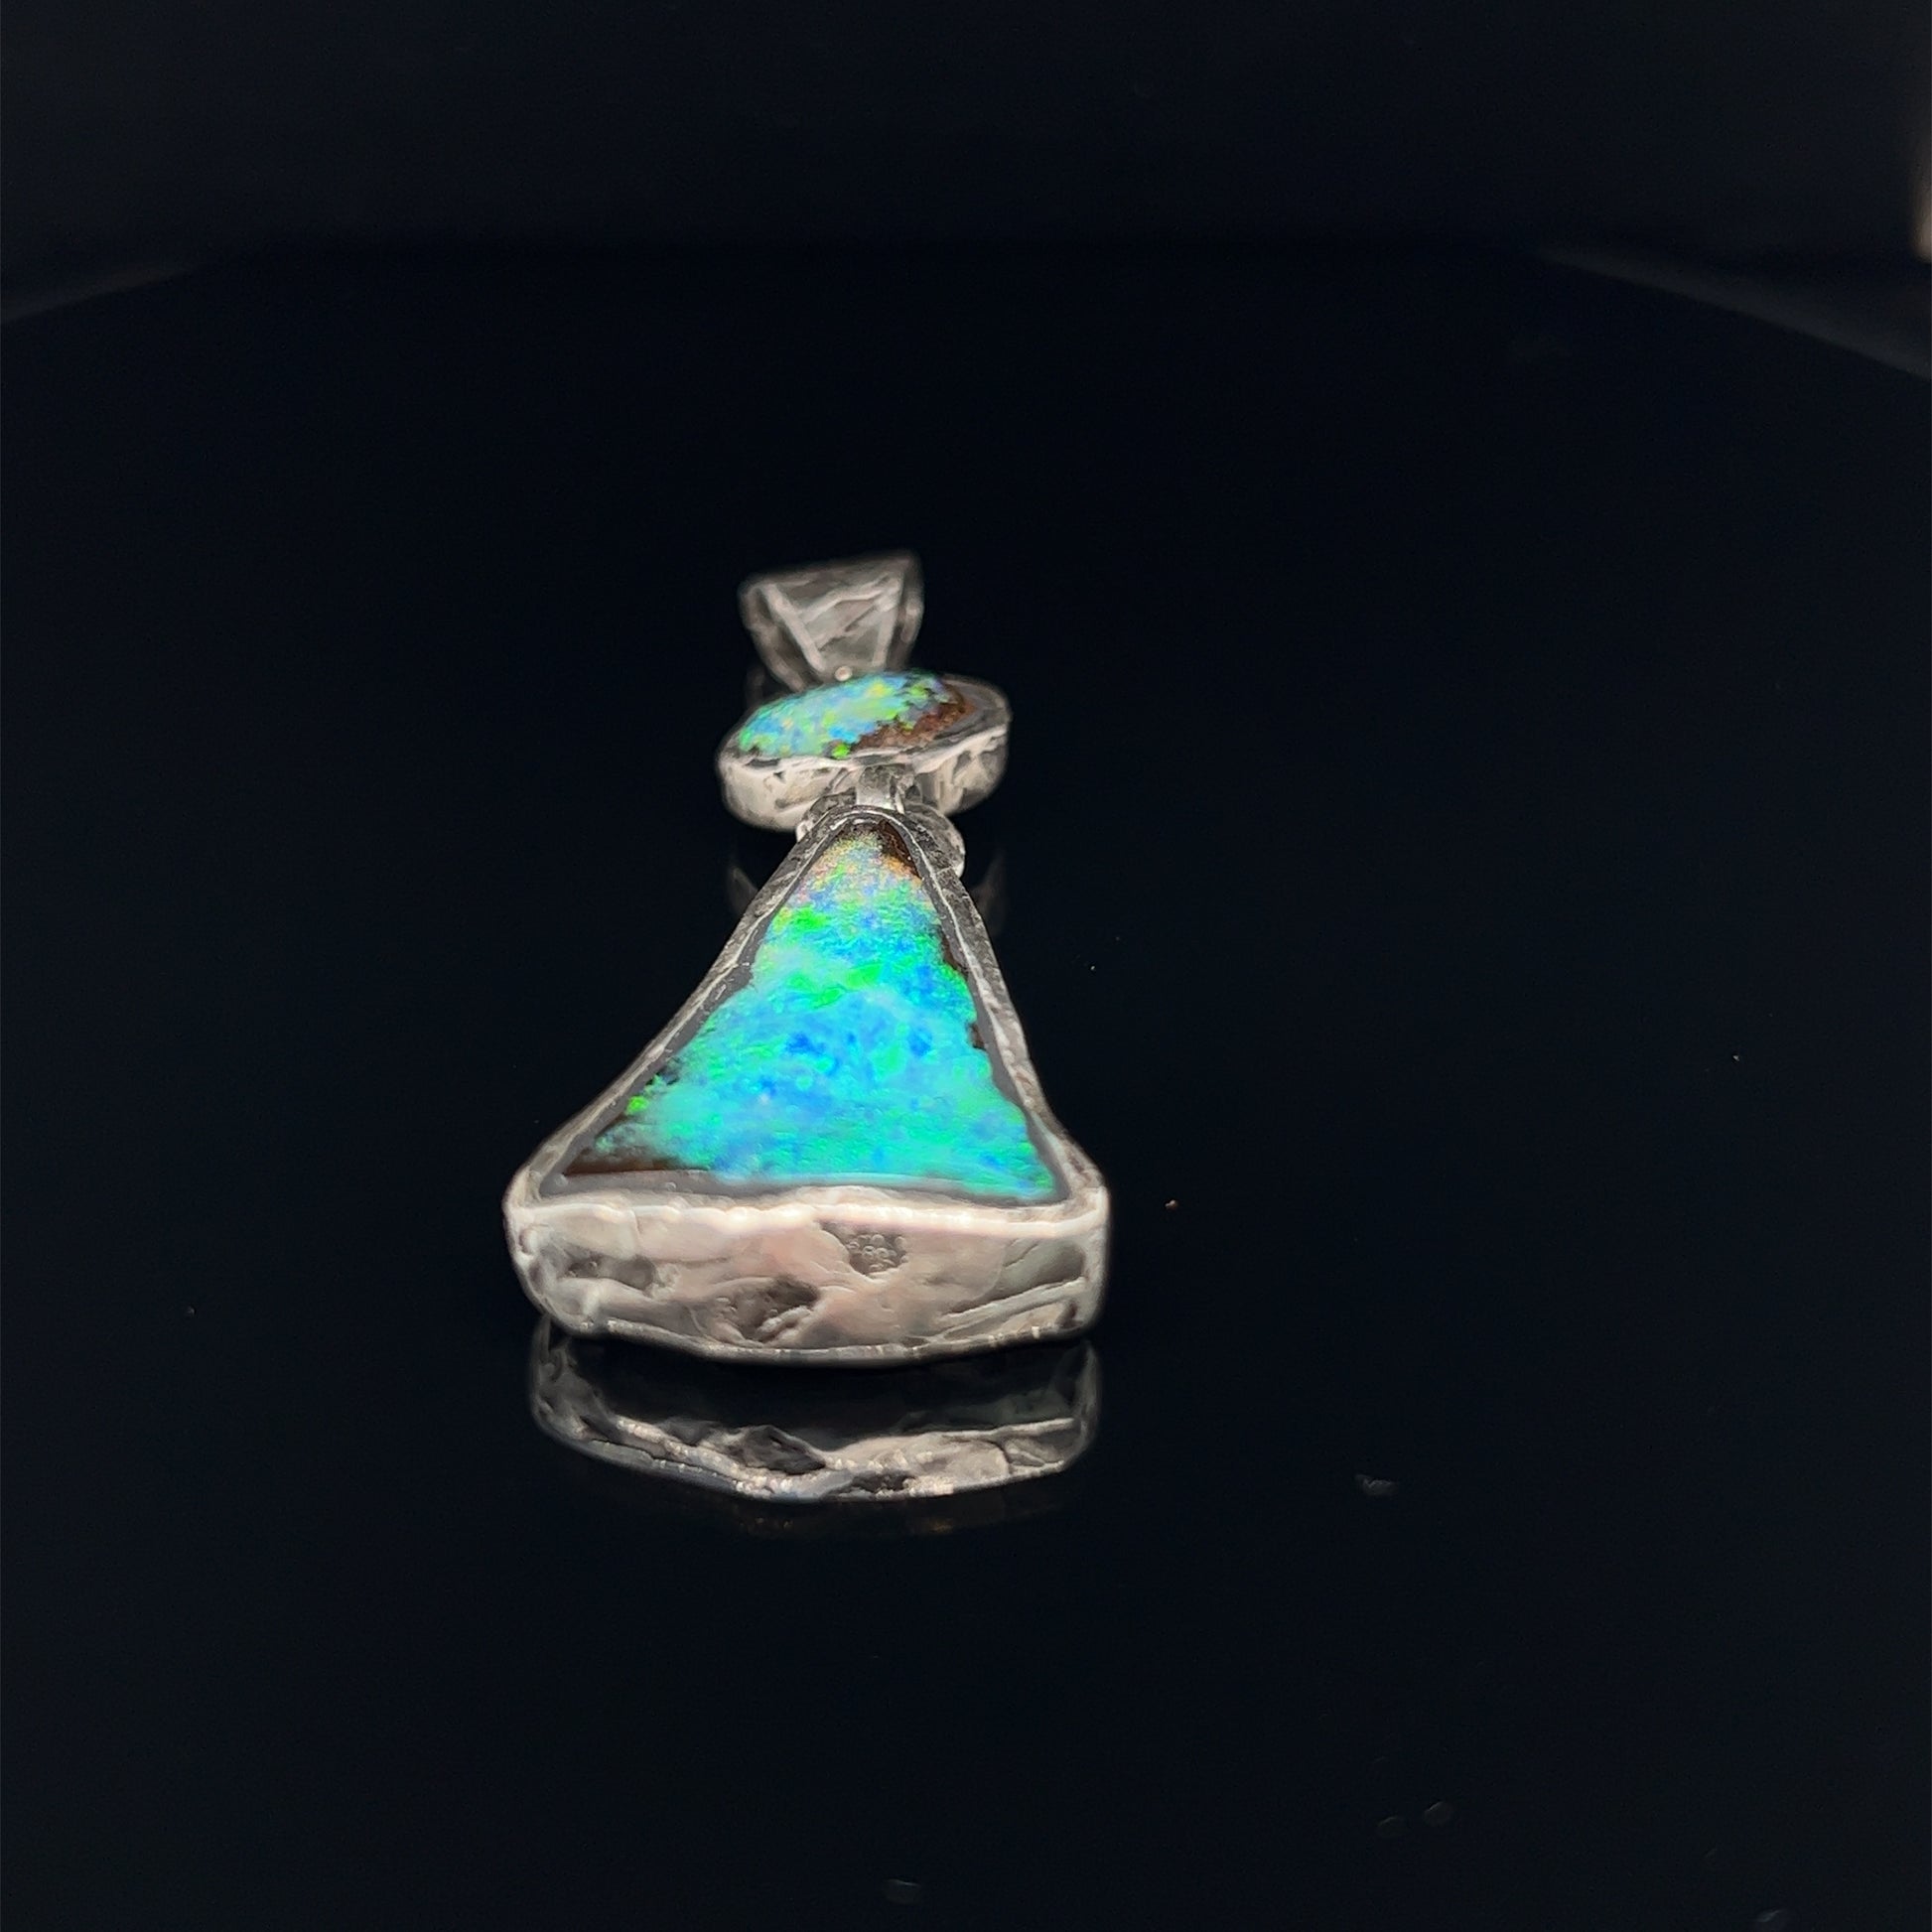 Stunning one-off hand made solid Boulder opal pendant. Hinged between stones to allow movement. Highly textured to enhance rawness. Made with Argentium silver, which has a higher silver content using part recycled silver, and a lower allergenic. Crafted by Sally Fisher.